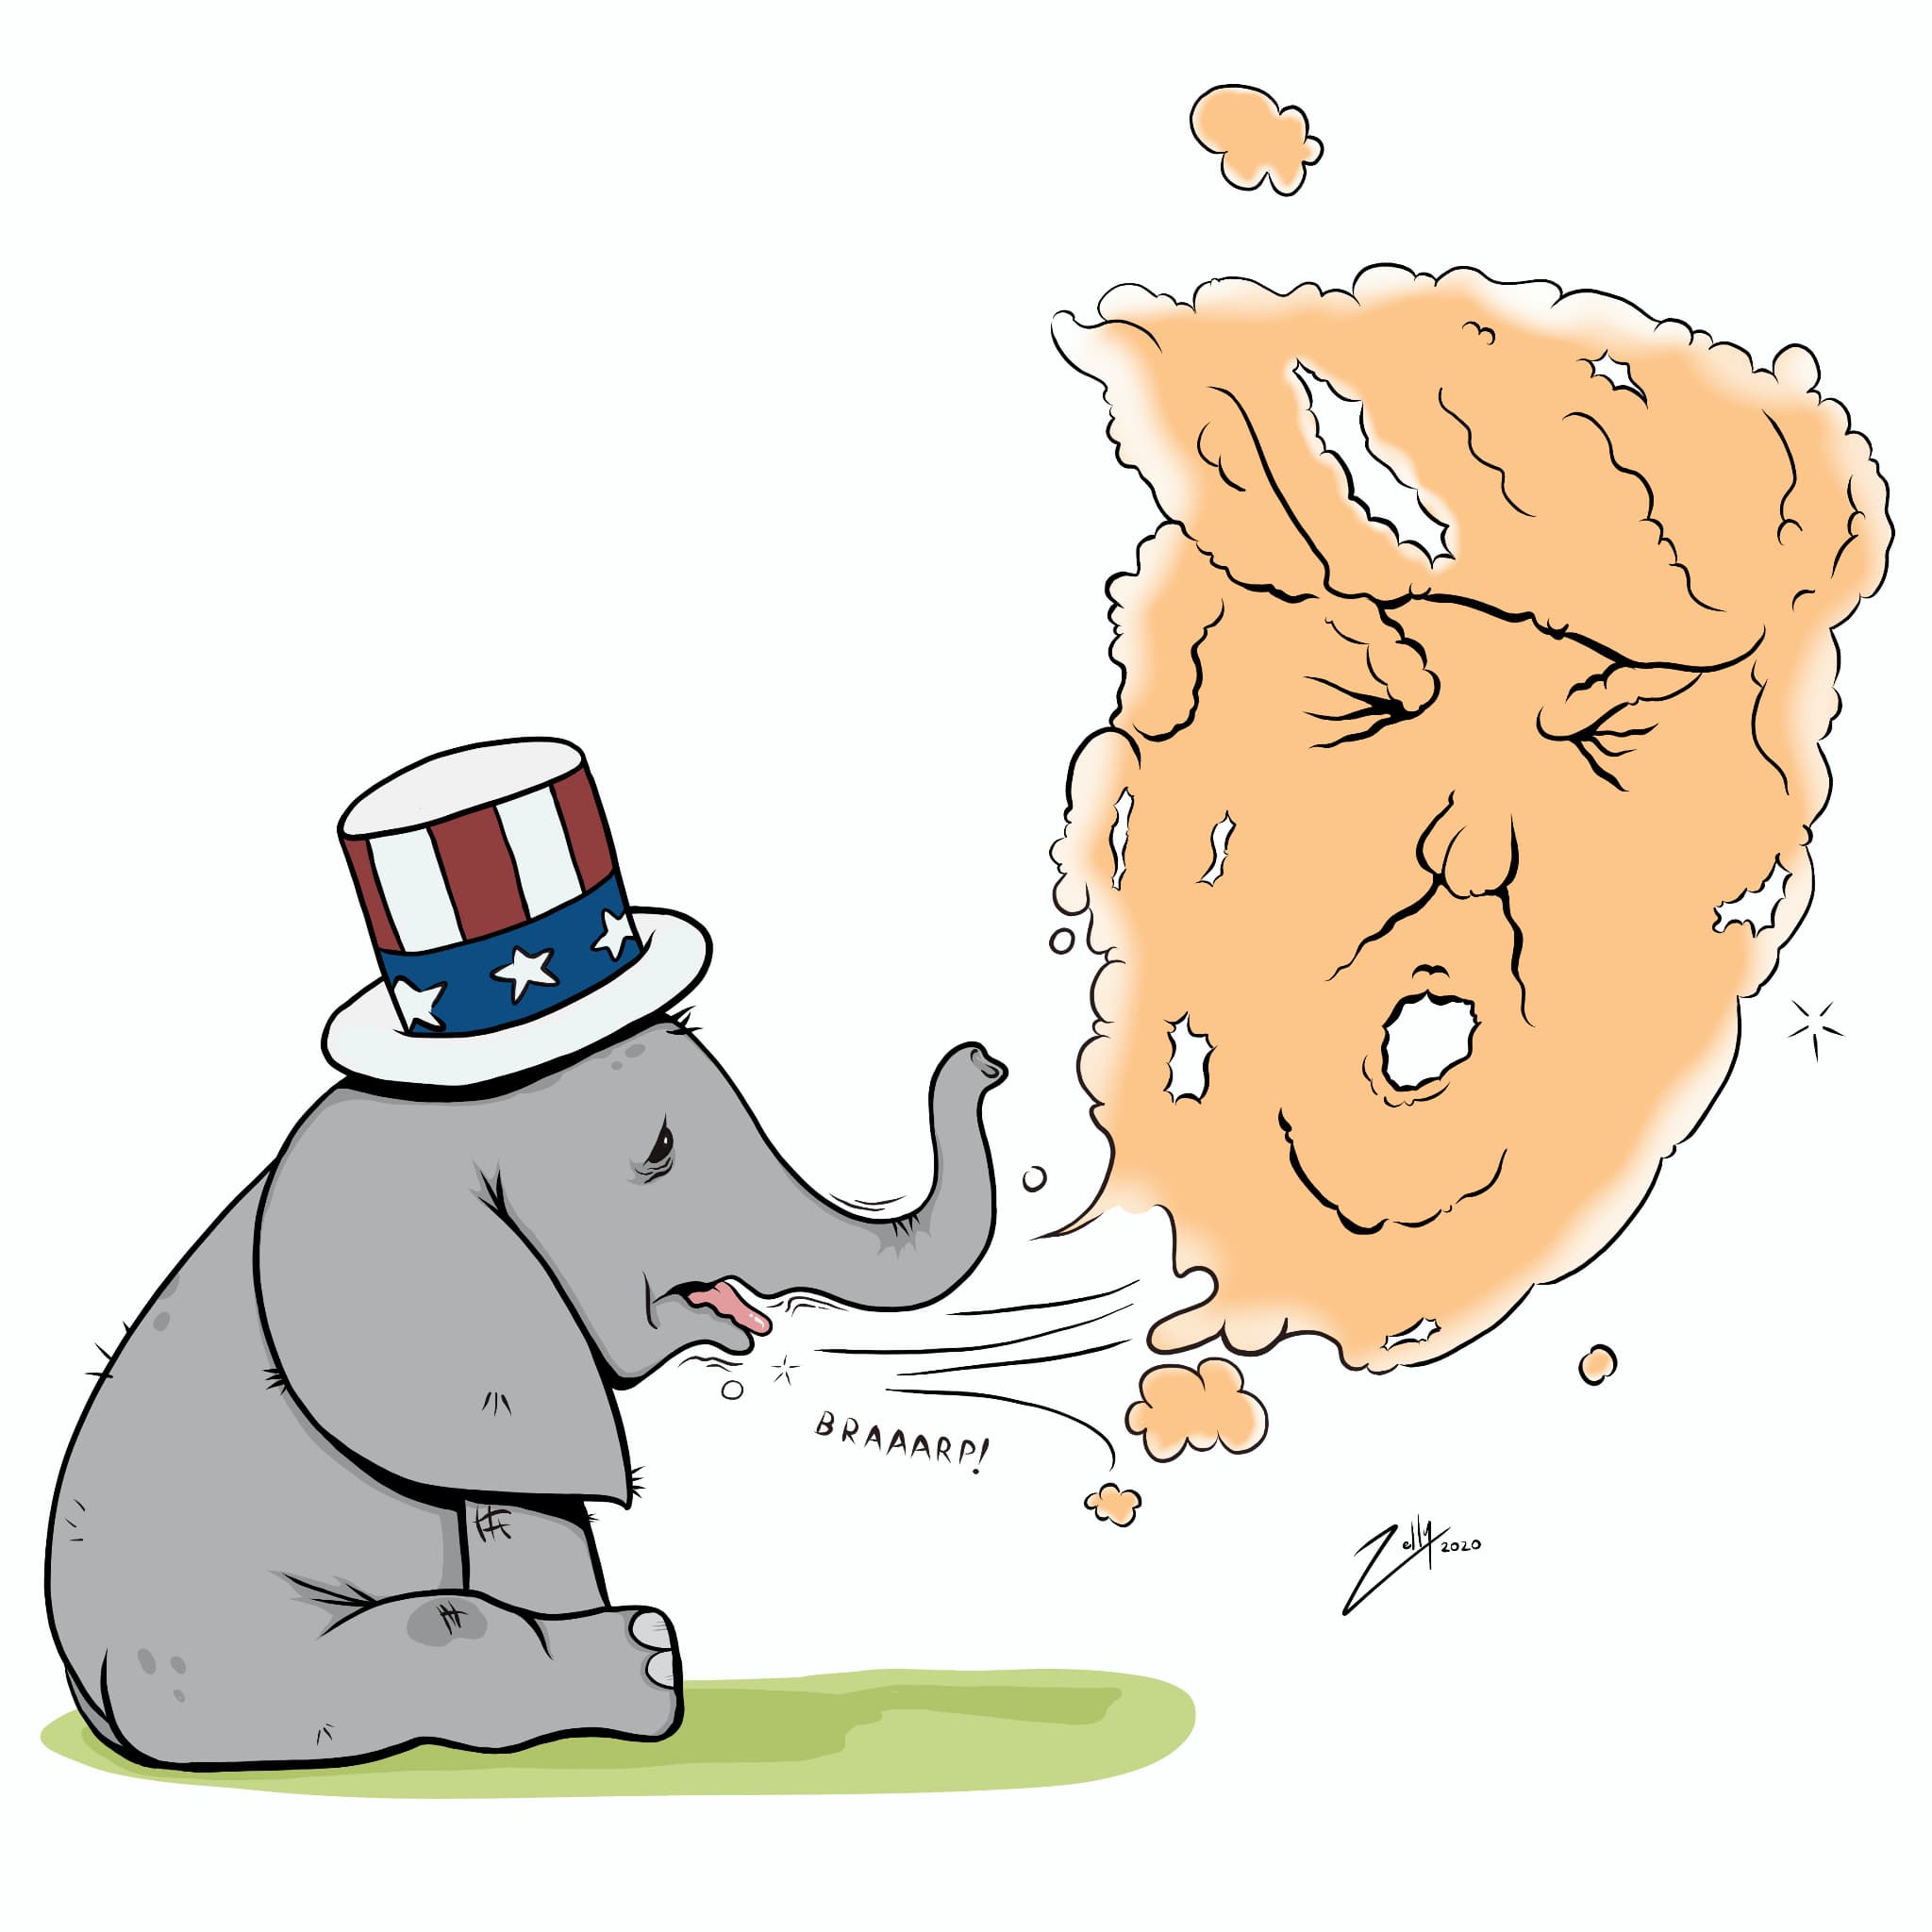 Sickly elephant wearing hat with US flag pattern burping a gaseous cloud in the shape of Donald Trump's face